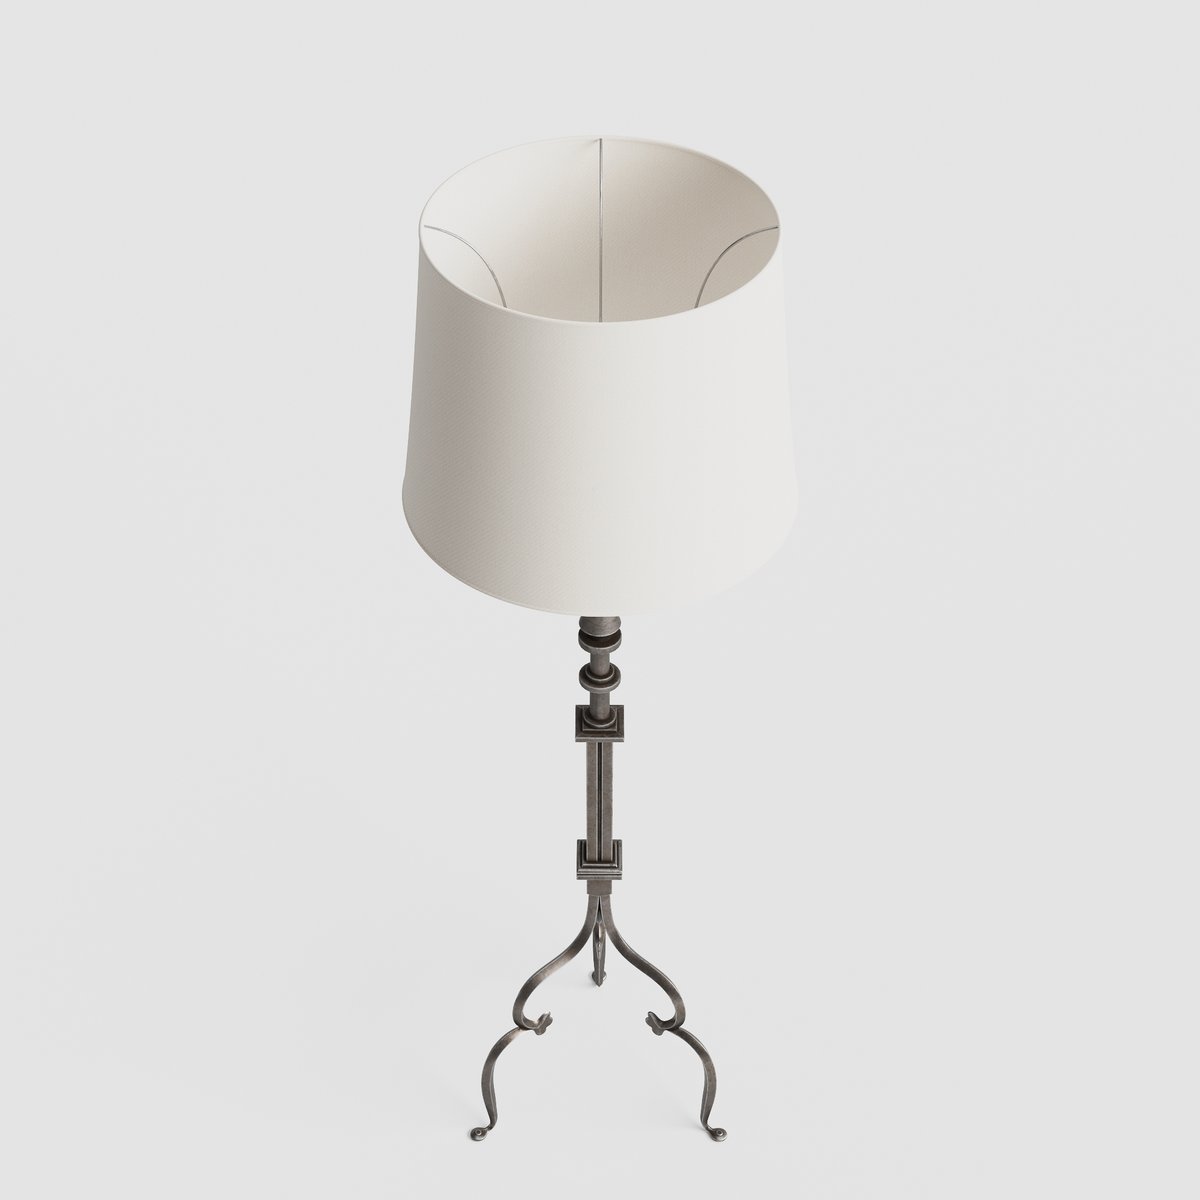 Madeleine Floor Lamp 3d model Style: Casual Shade: Linen Dimensions: Ø 54 x H 168 cm Unwrapped, no overlapping. Files: 3ds max, VRay and Corona, .DWG, .FBX, .OBJ turbosquid.com/ru/3d-models/3… #lamp #tripod #floorlamp #3d #3dmodel #render #edvace #cgi #interior #visualization #staging